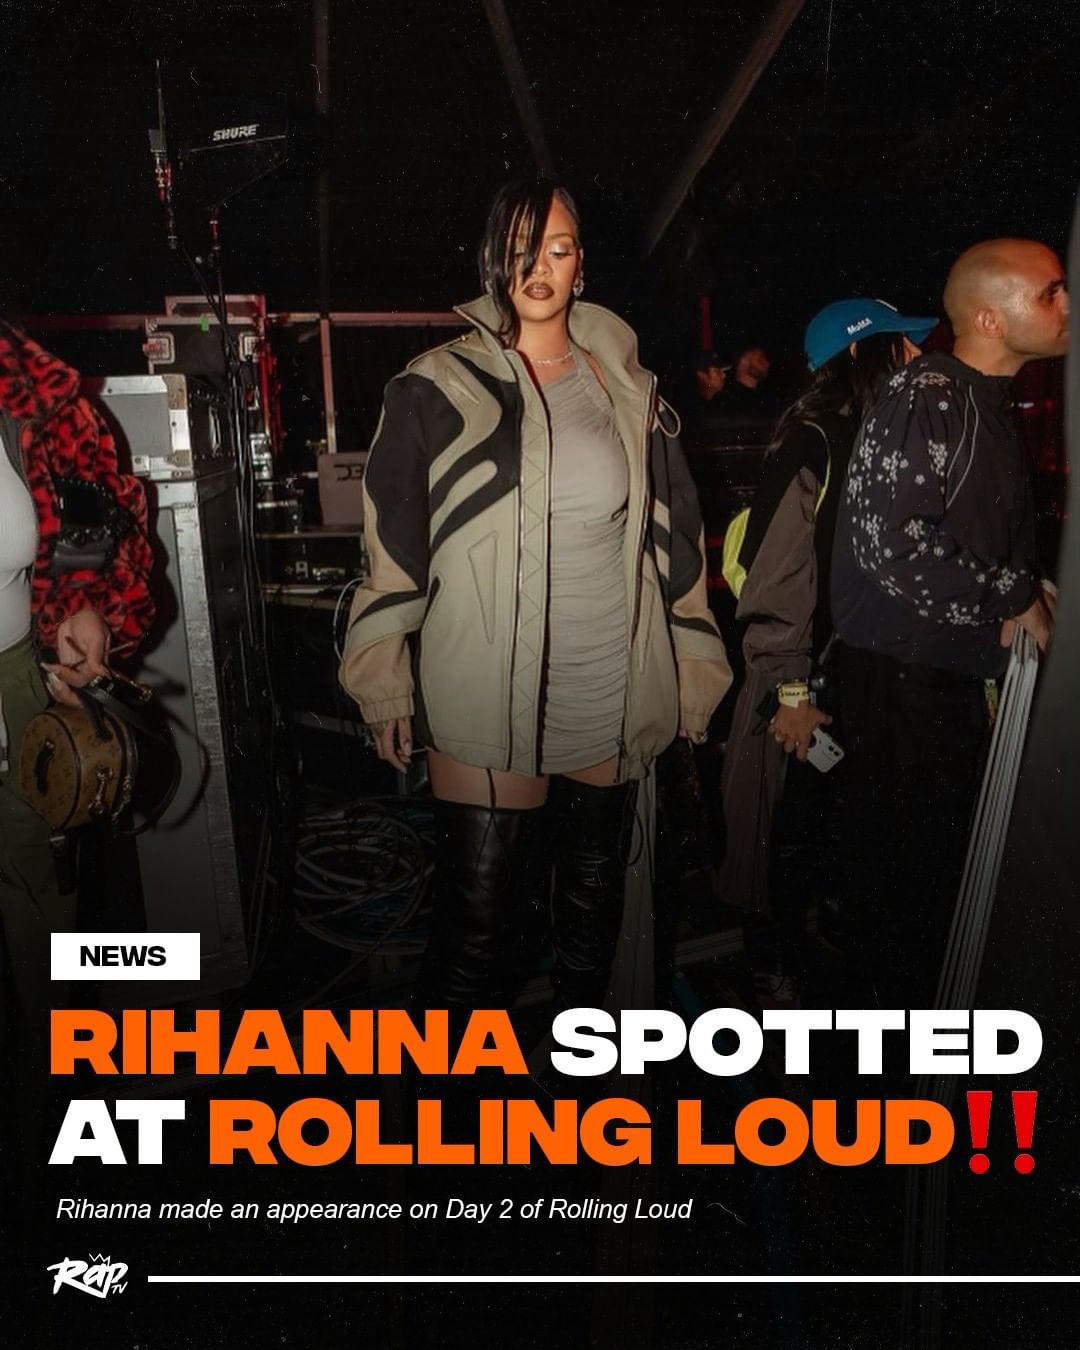 RapTV - #Rihanna was spotted at Rolling Loud on Day 2